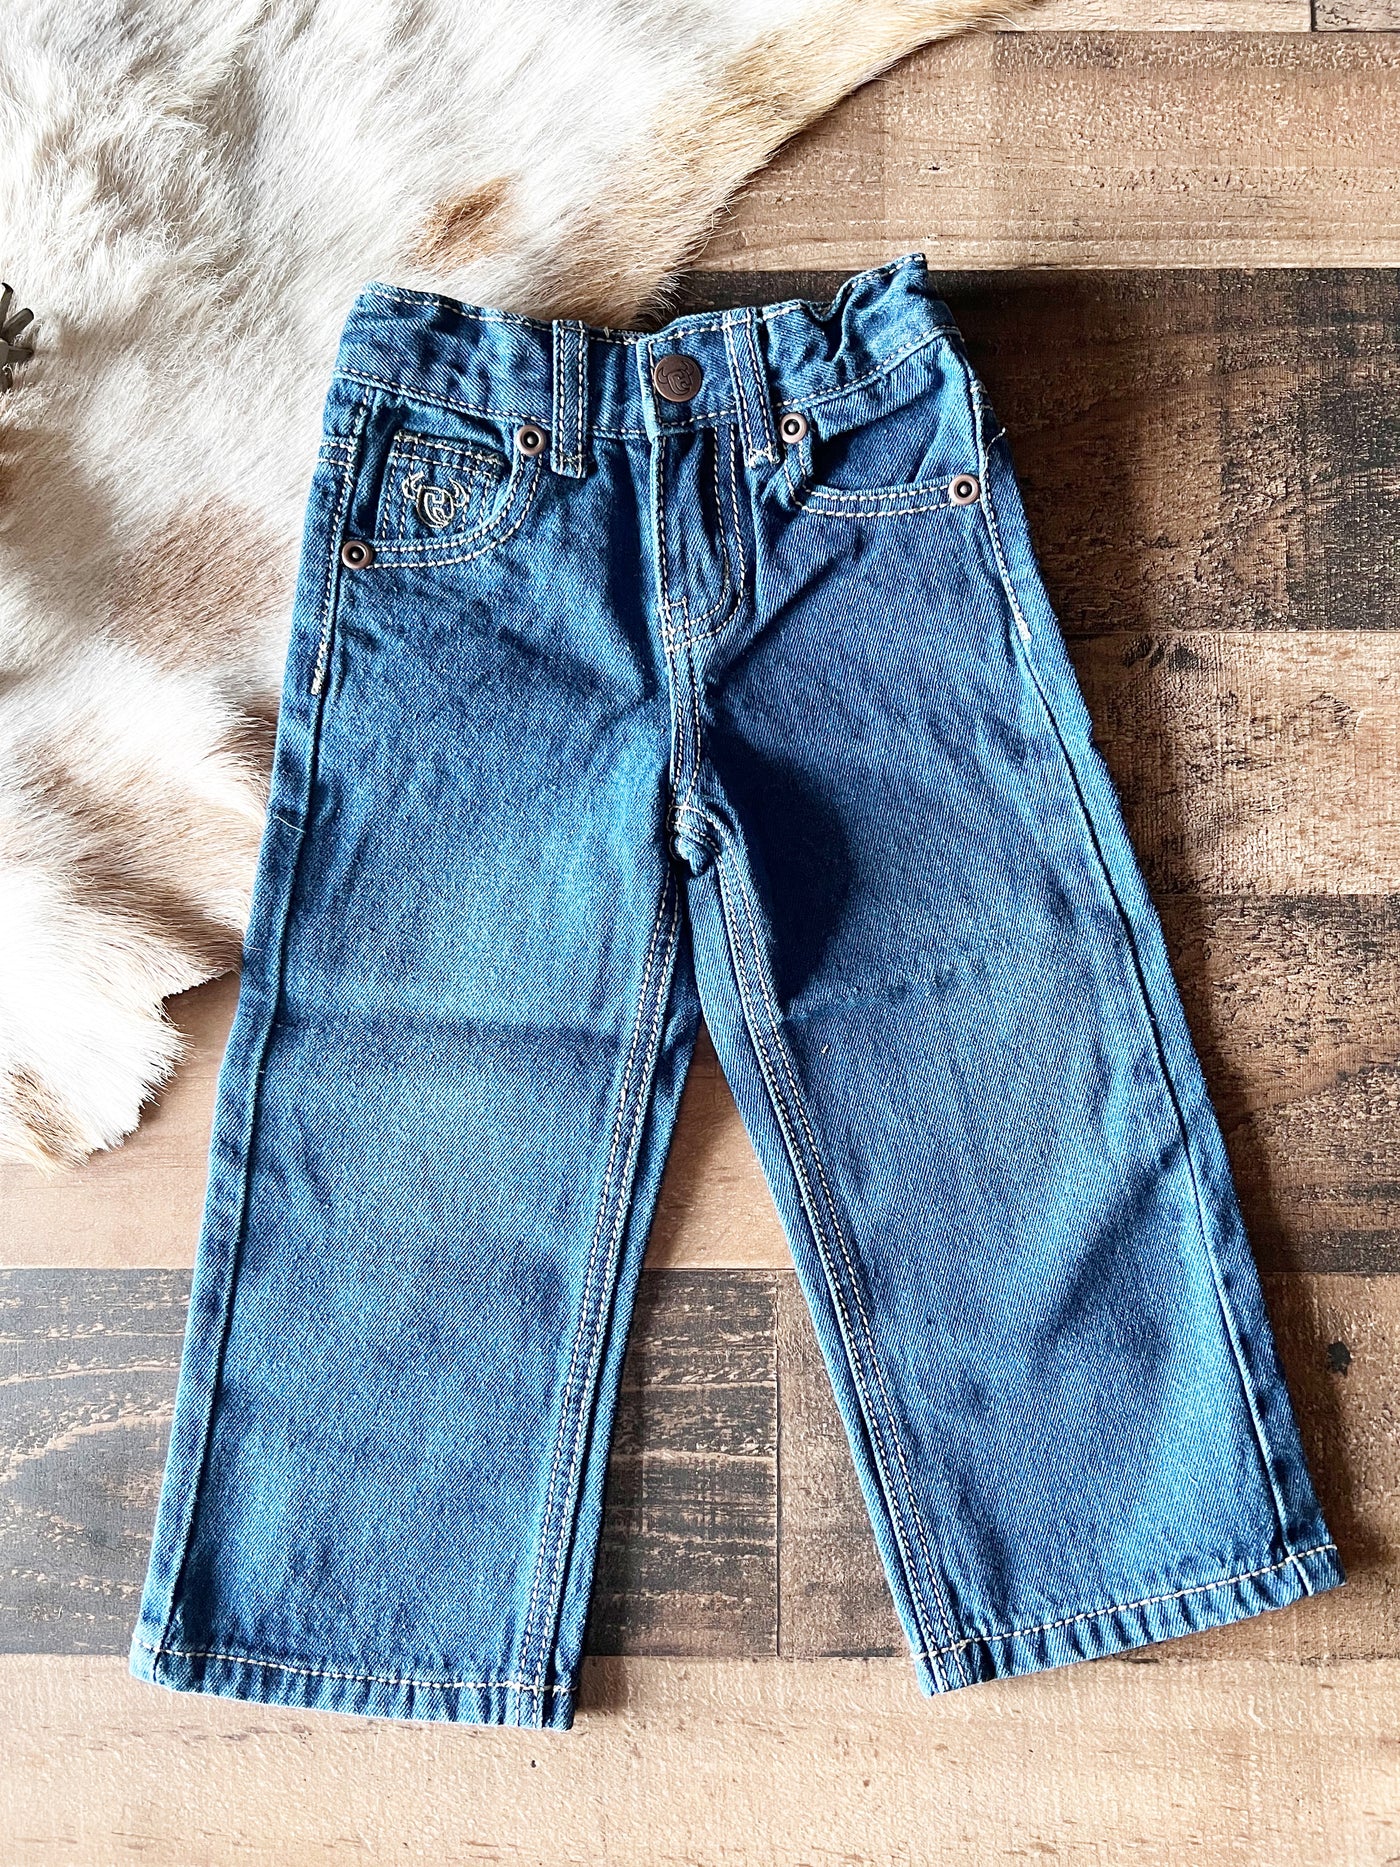 The Bruiser Jeans